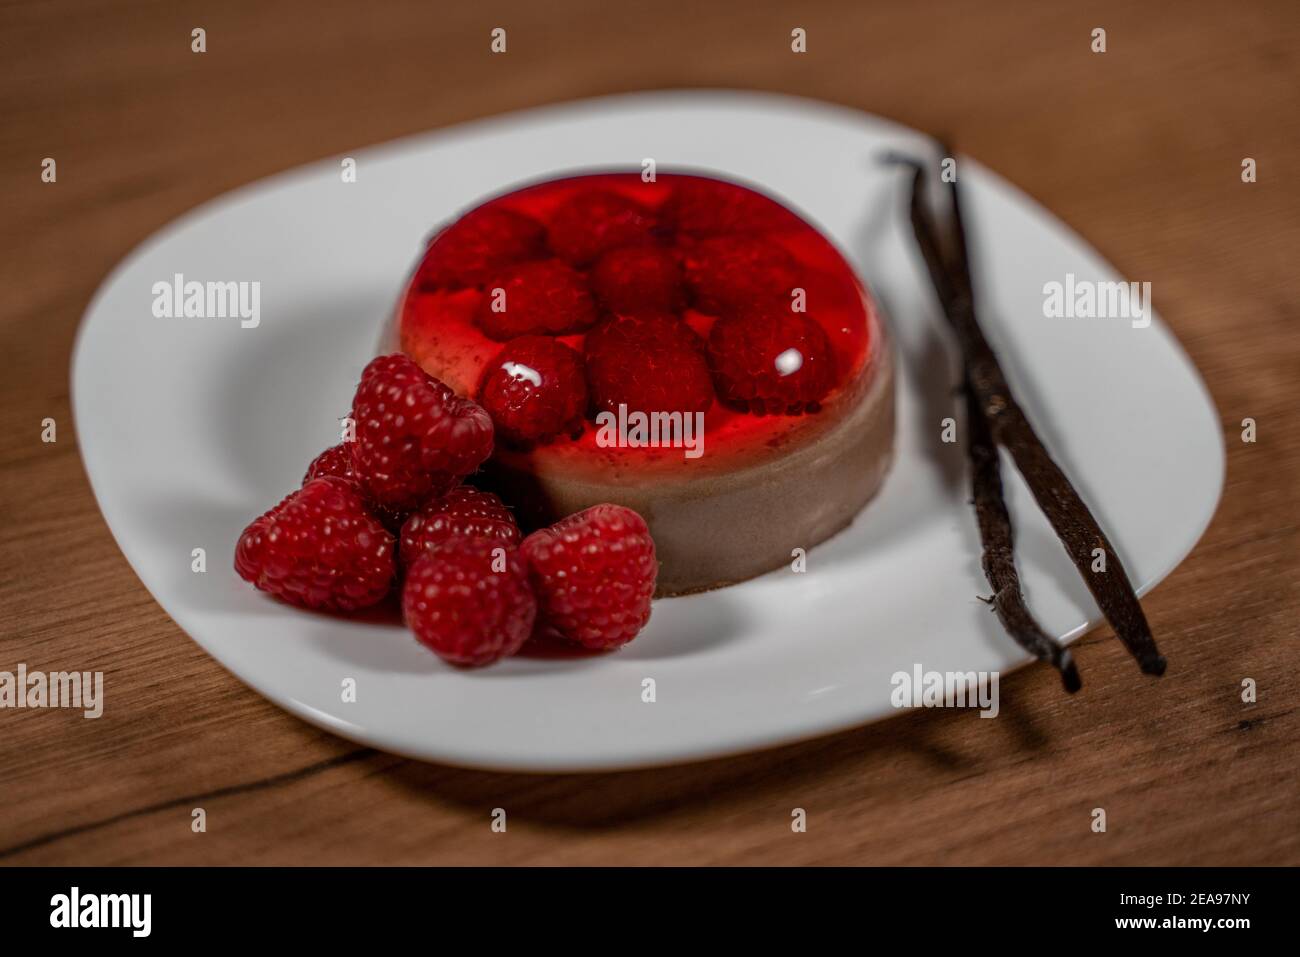 Chocolate pudding with raspberry jelly decorated with fresh raspberries and vanilla beans on white plate. Close-up image on wooden surface Stock Photo